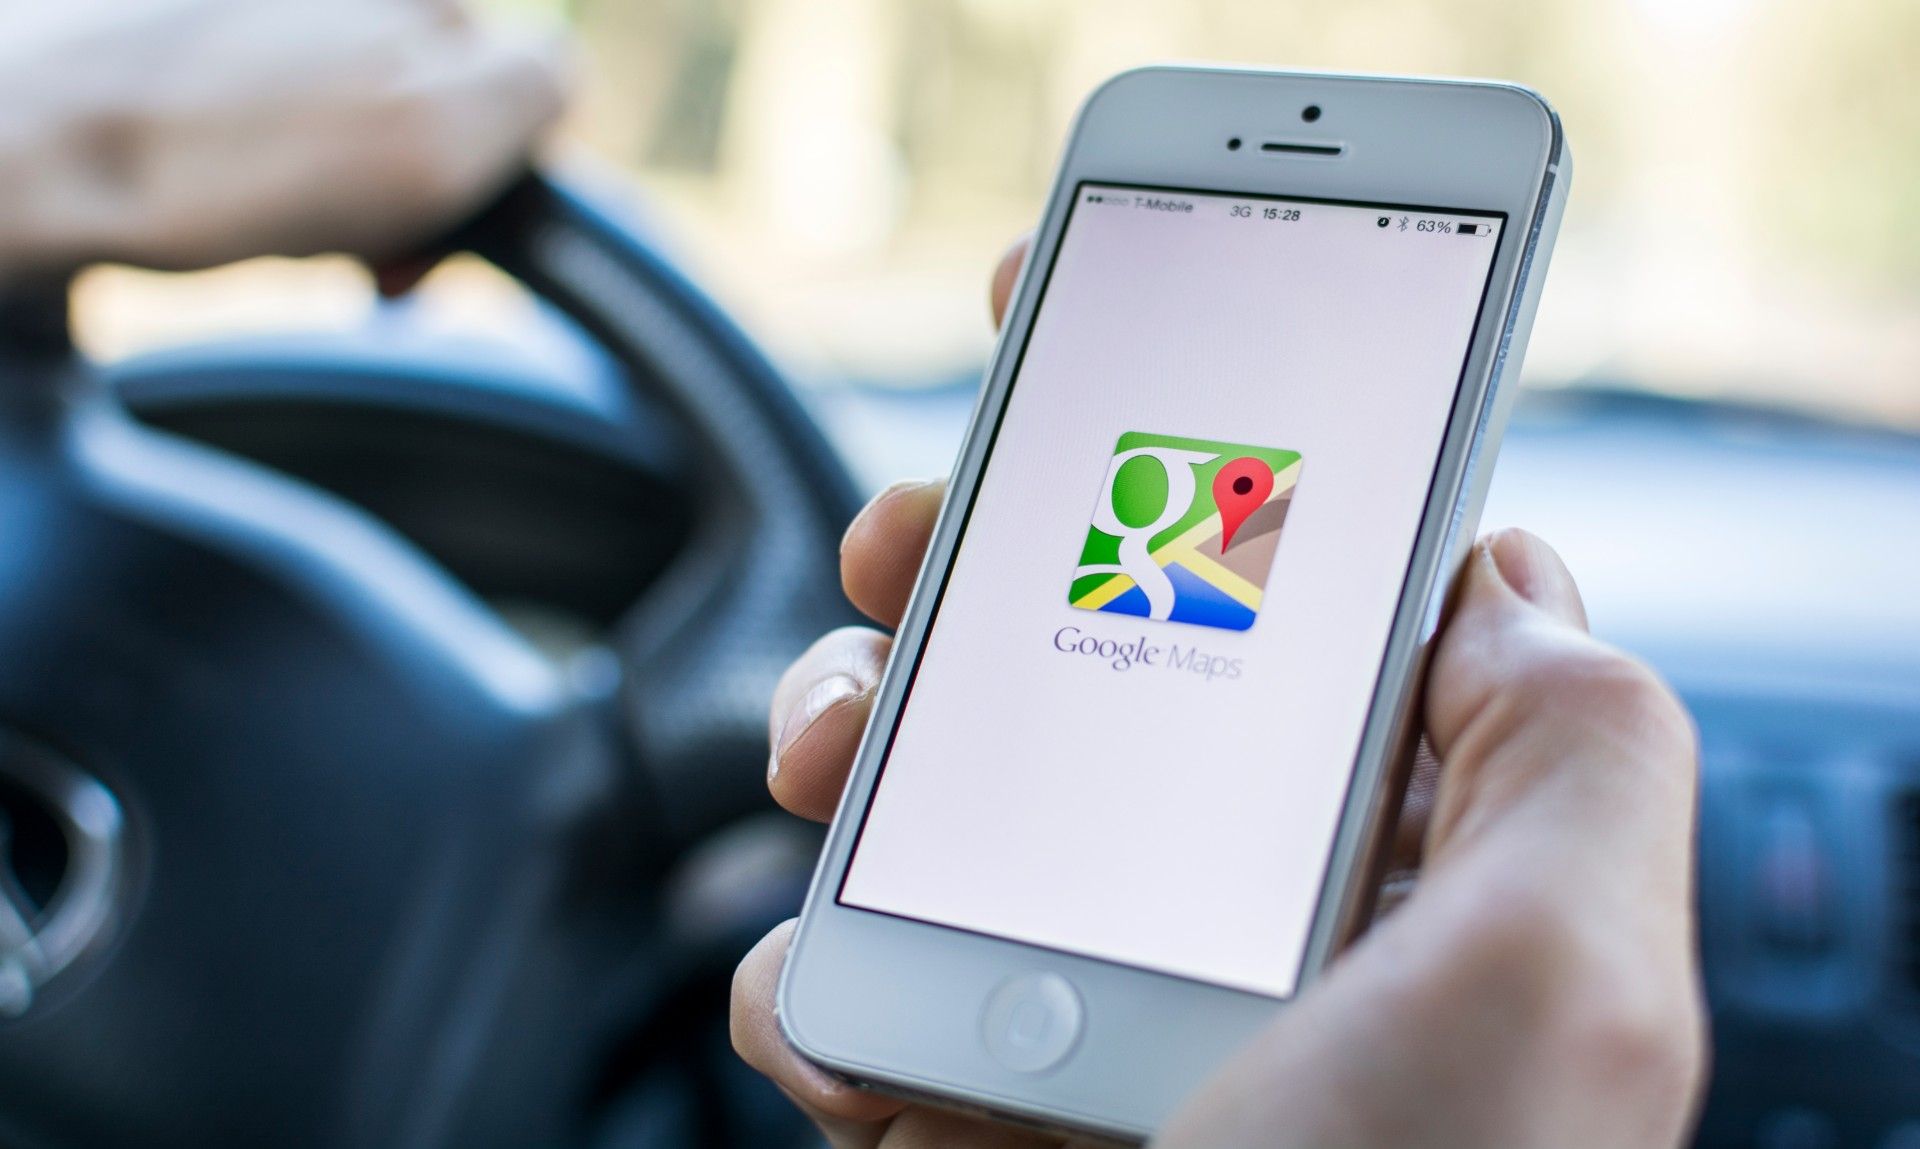 Driver holds iPhone showing Google Maps app screen